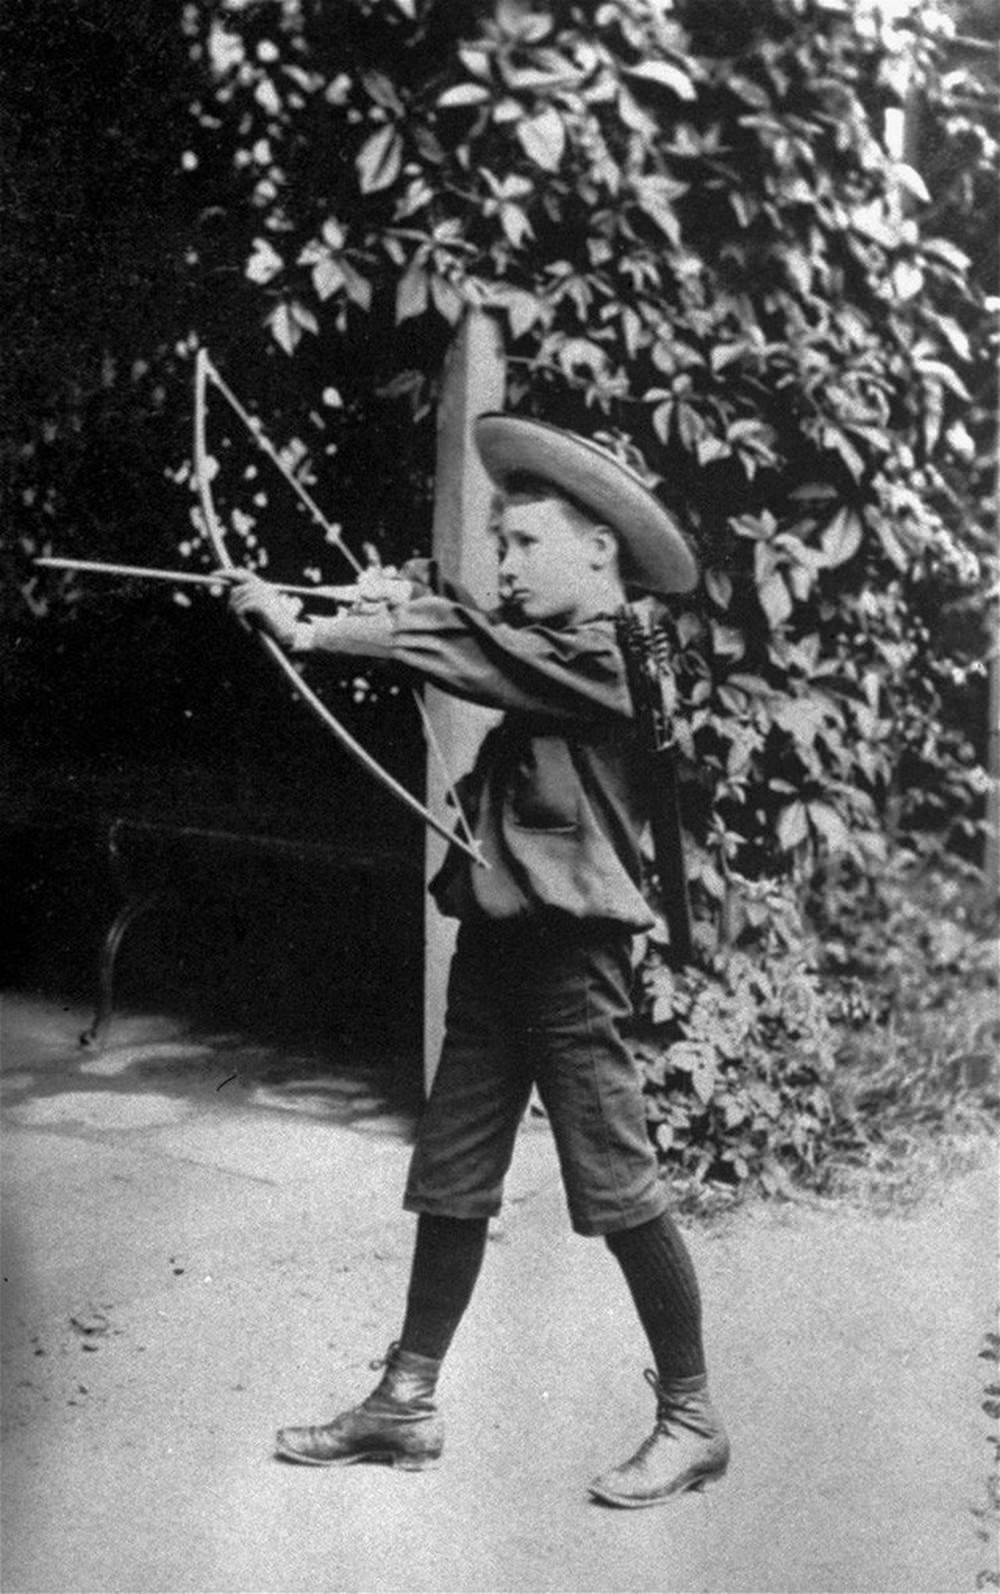 Franklin Delano Roosevelt playing with a bow and arrow circa 1890.